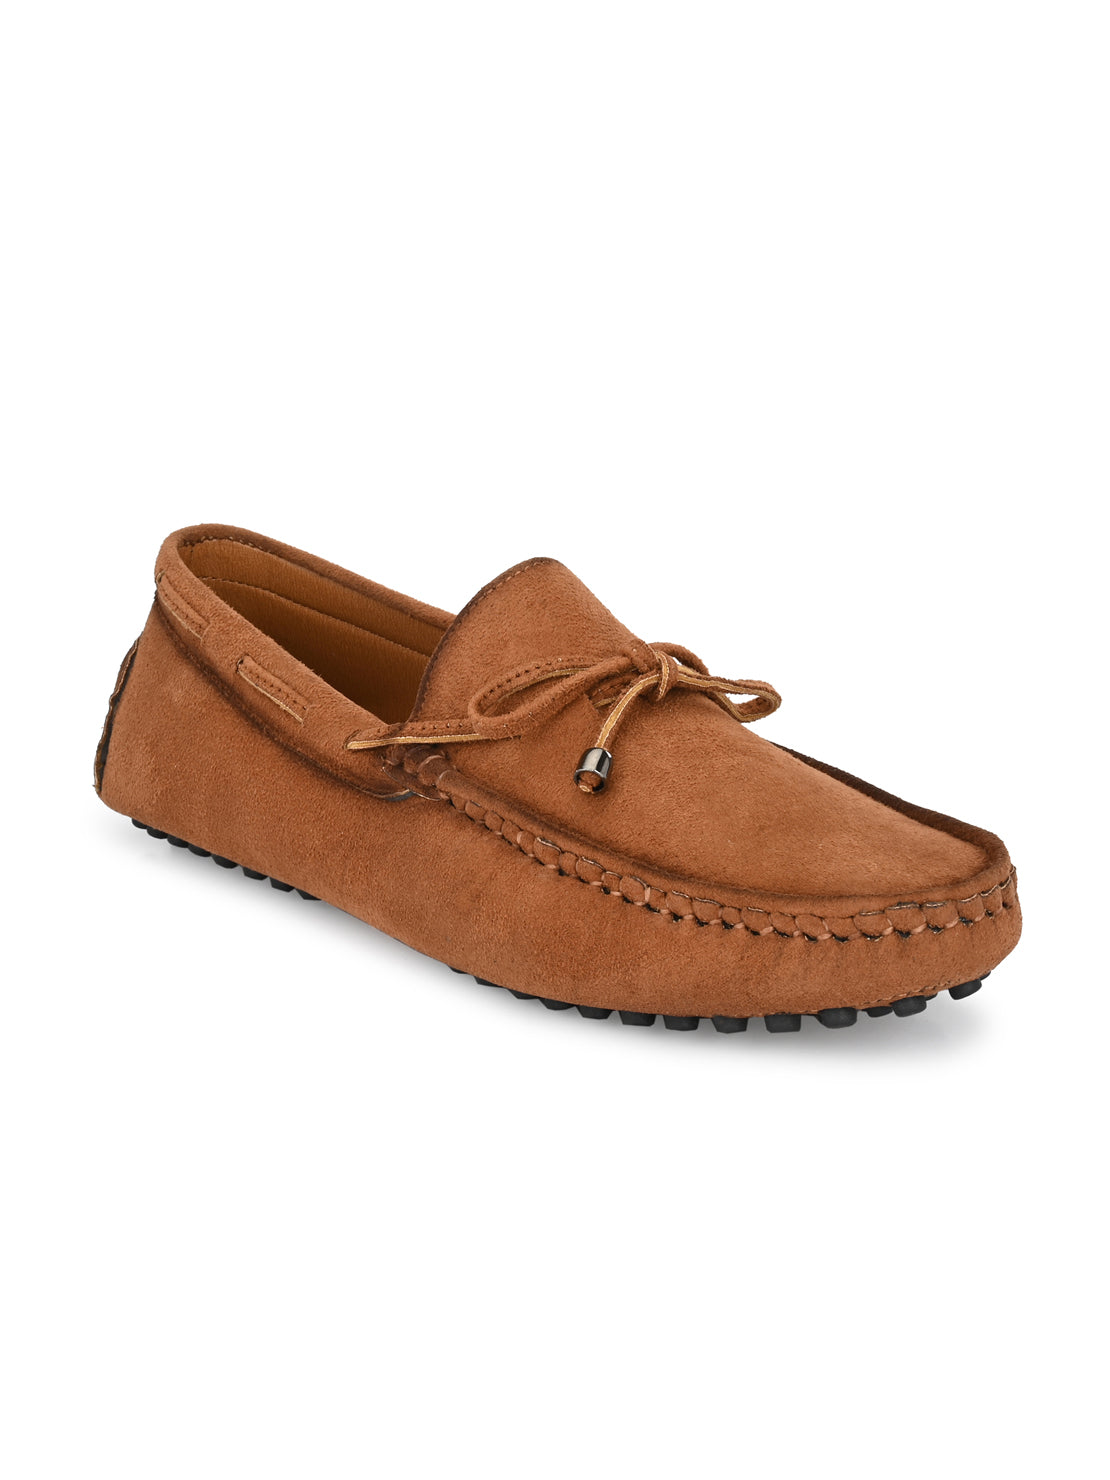 Guava Men's Tan Casual Slip On Driving Loafers (GV15JA758)